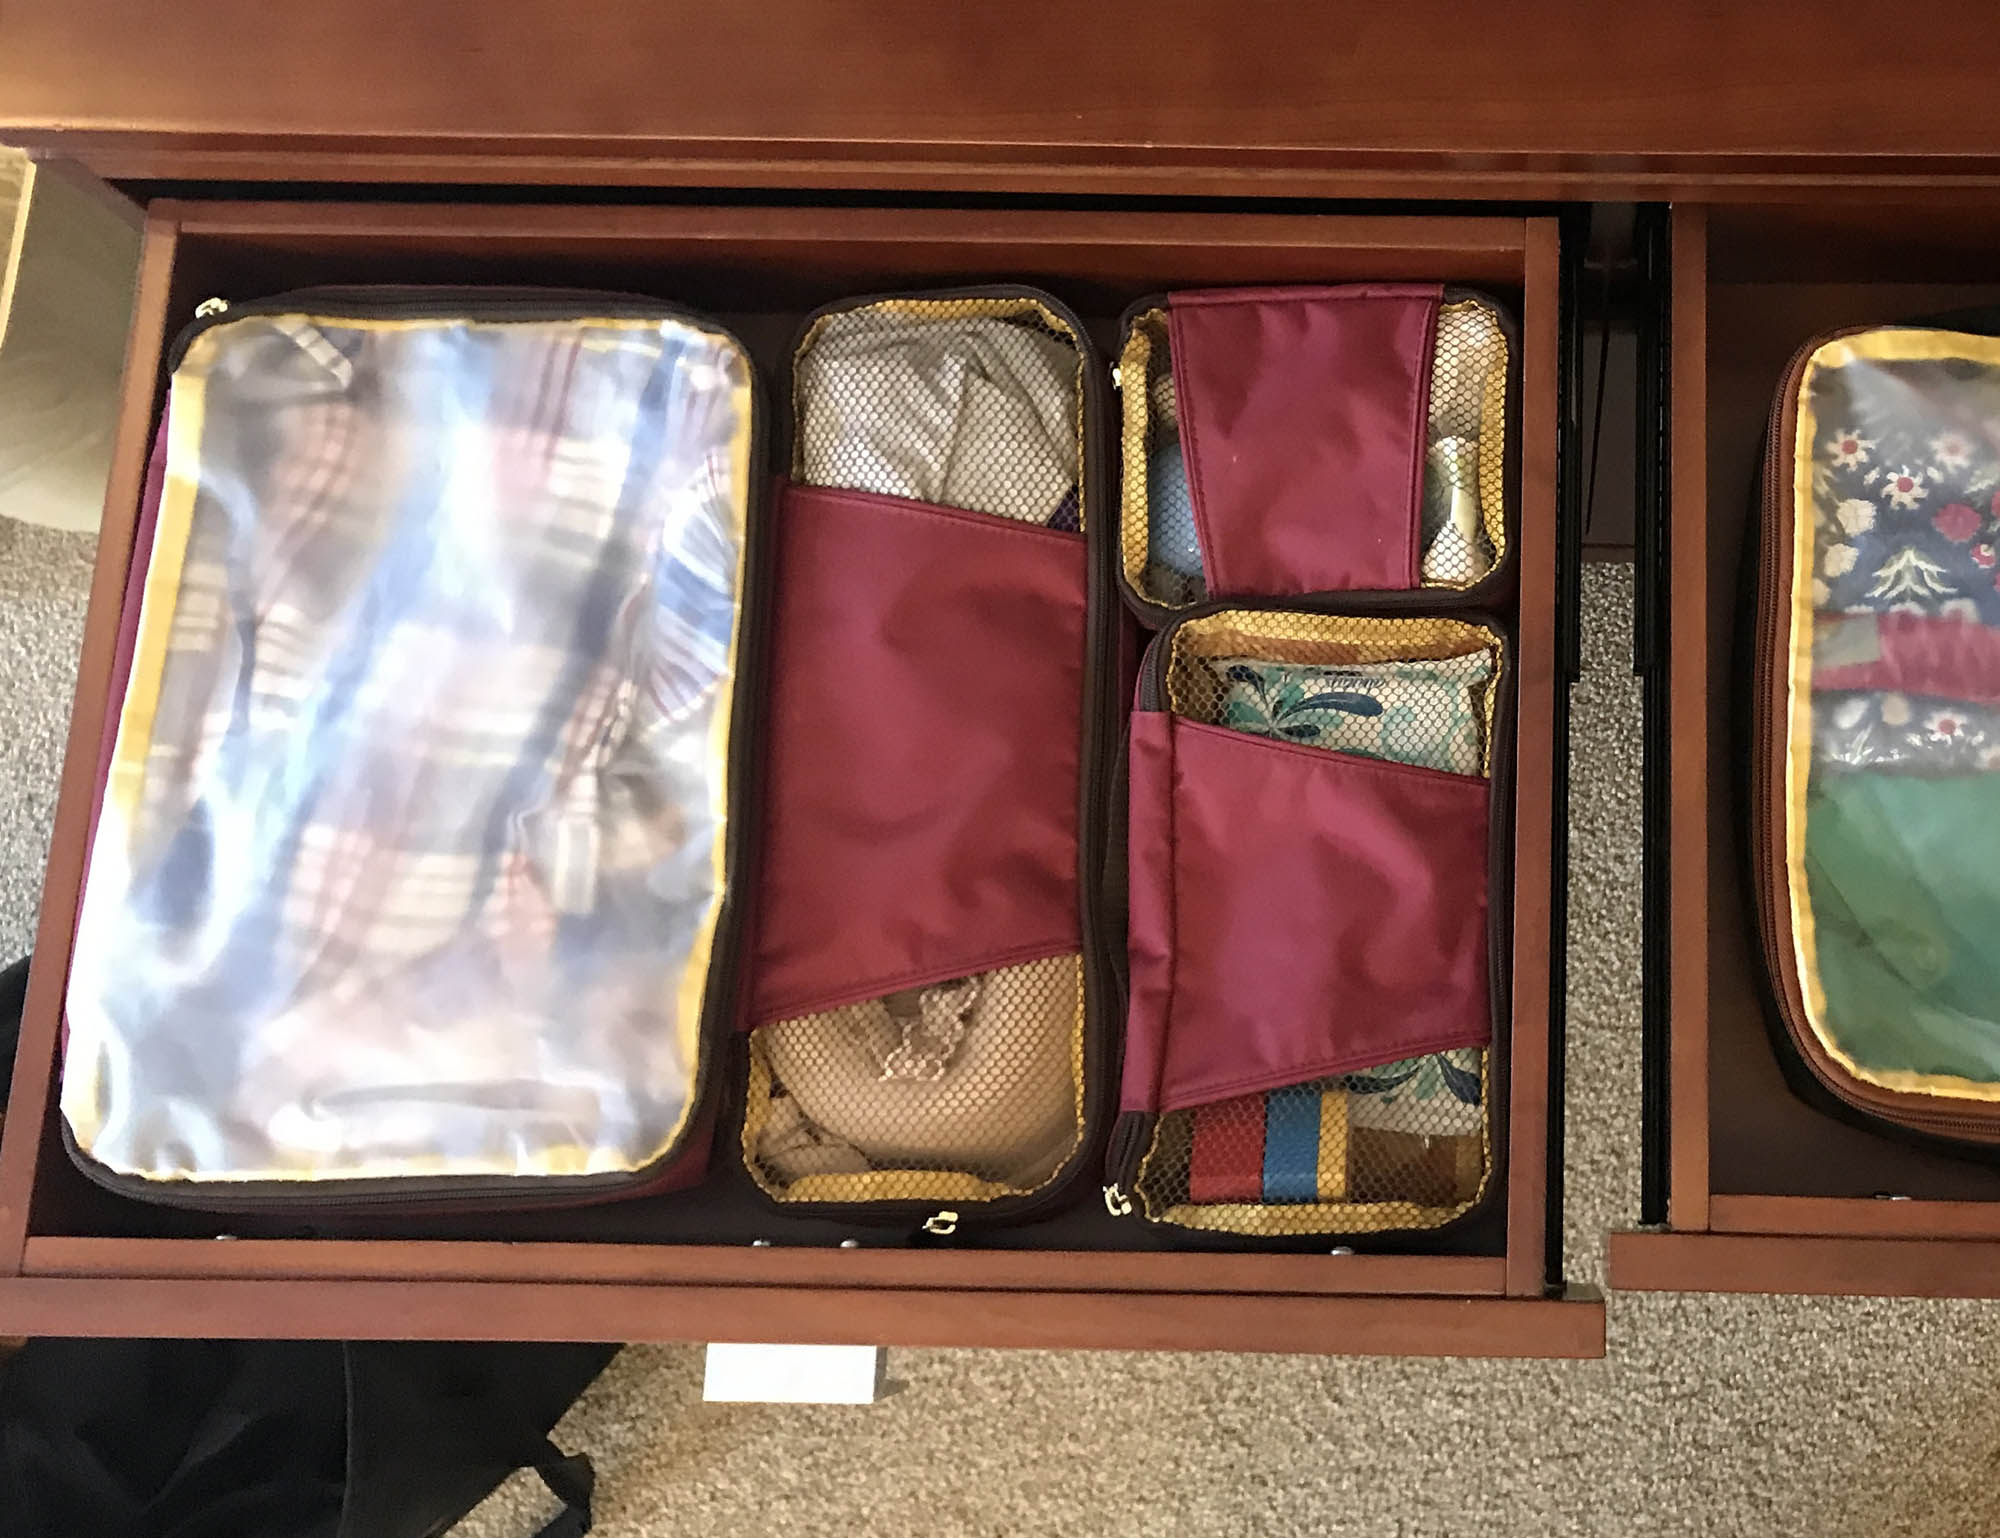 How to pack a carry-on with a week's worth of clothes! – Case Elegance